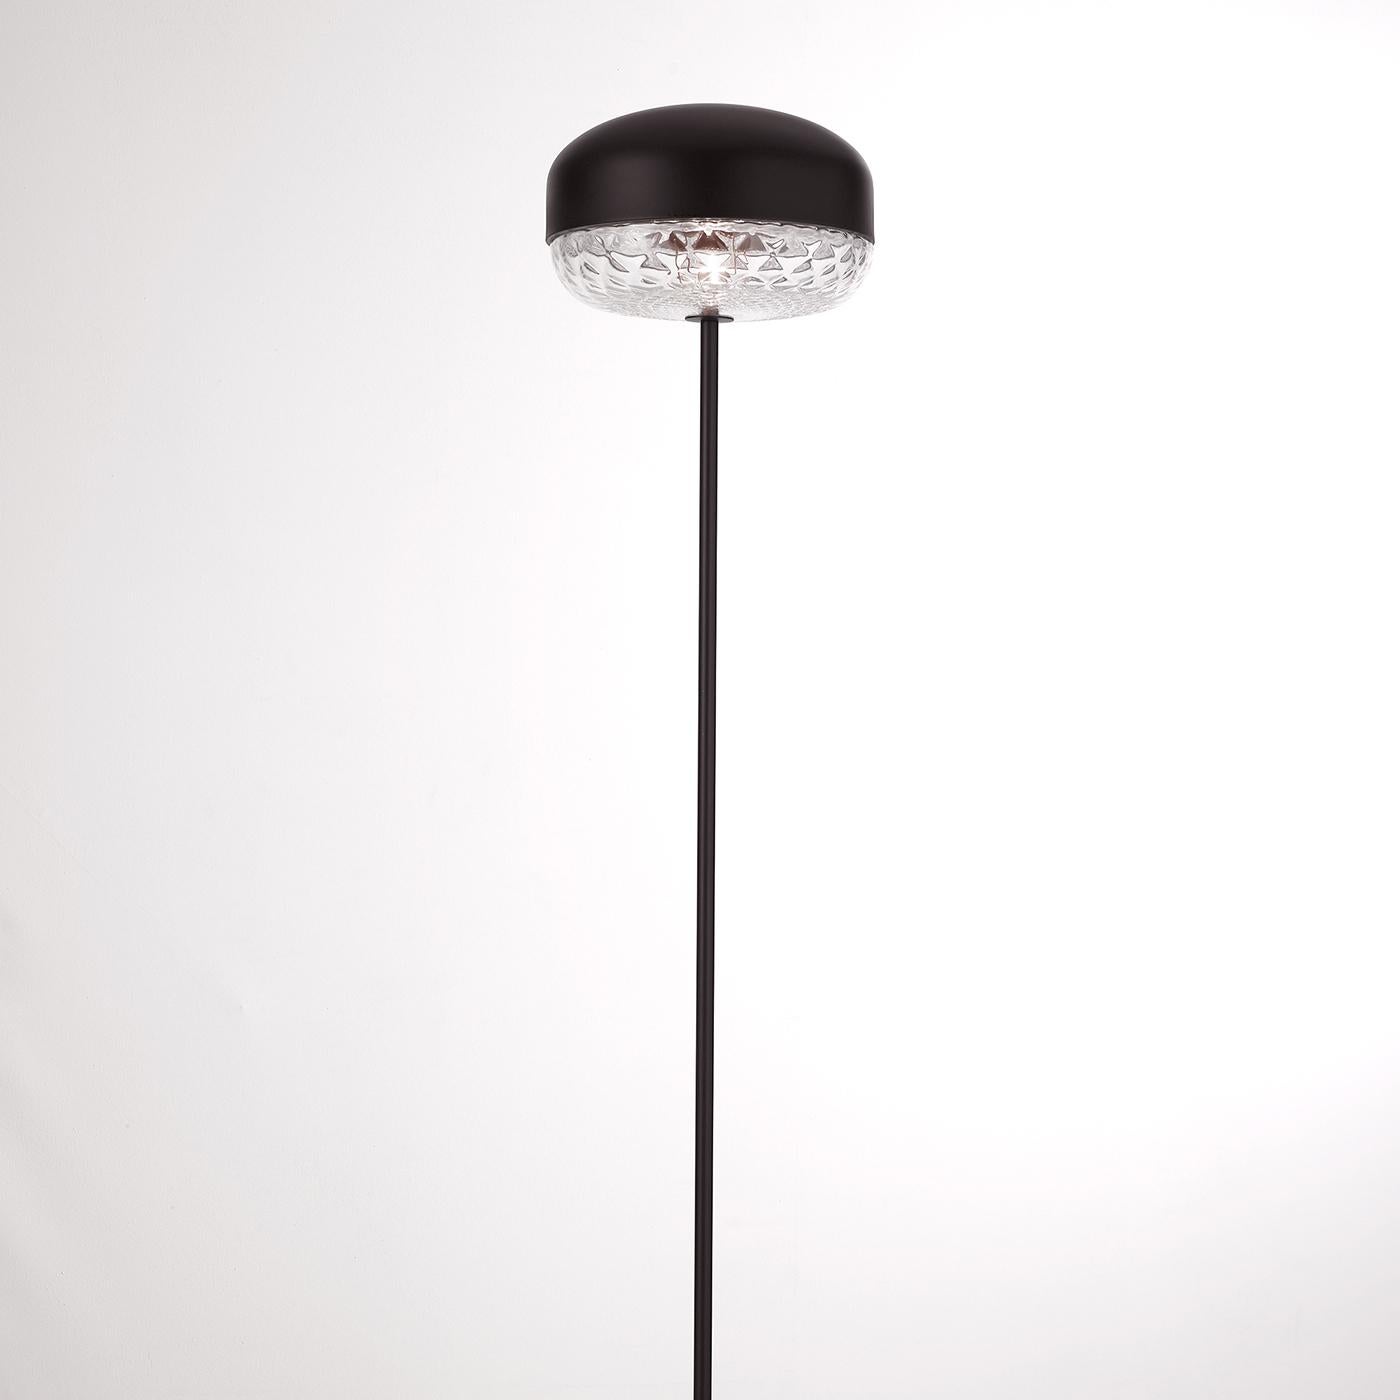 Showcasing a minimal and harmonious metal structure with a matte black finish, the Balloton floor lamp conveys a decidedly modern glamour with an accent of antique tradition. A black, slender stem rises from a circular base that visually